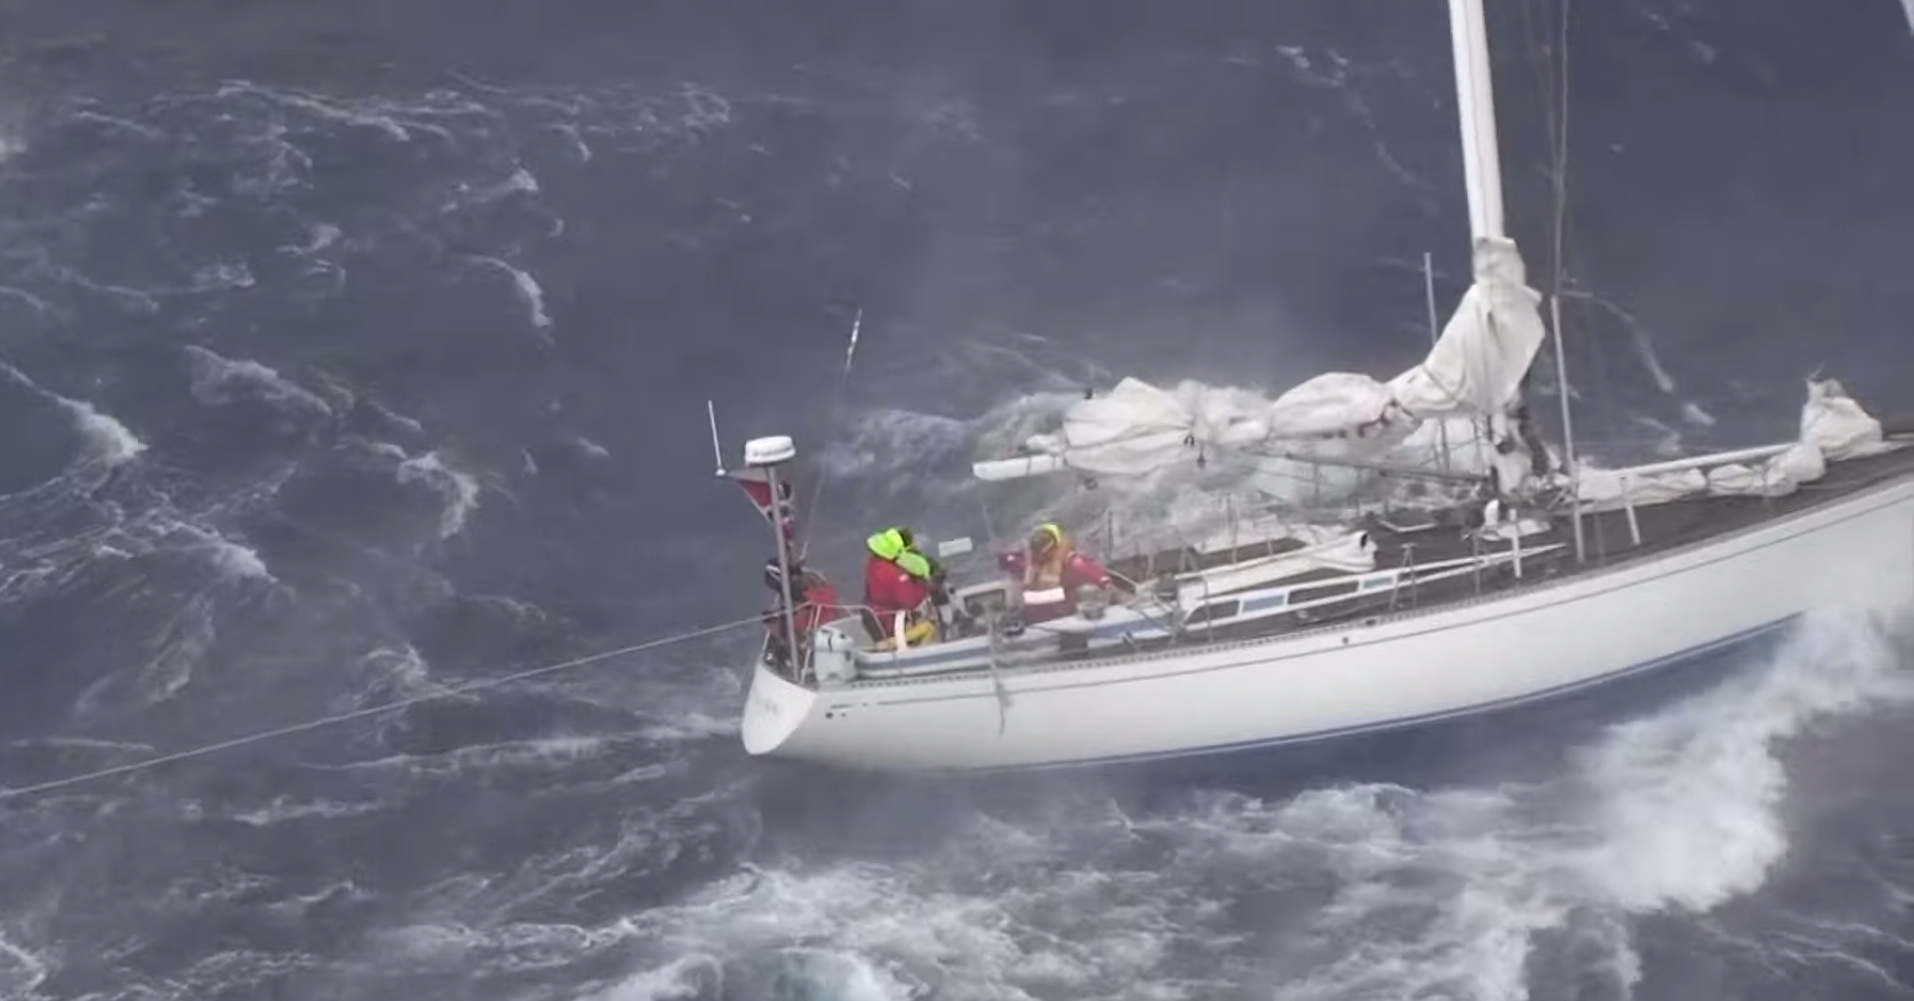 PHOTO: Portuguese officials released a video of the dramatic moments when they rescued a French family from their yacht during extremely turbulent weather in the mid-Atlantic on May 7, 2015. 